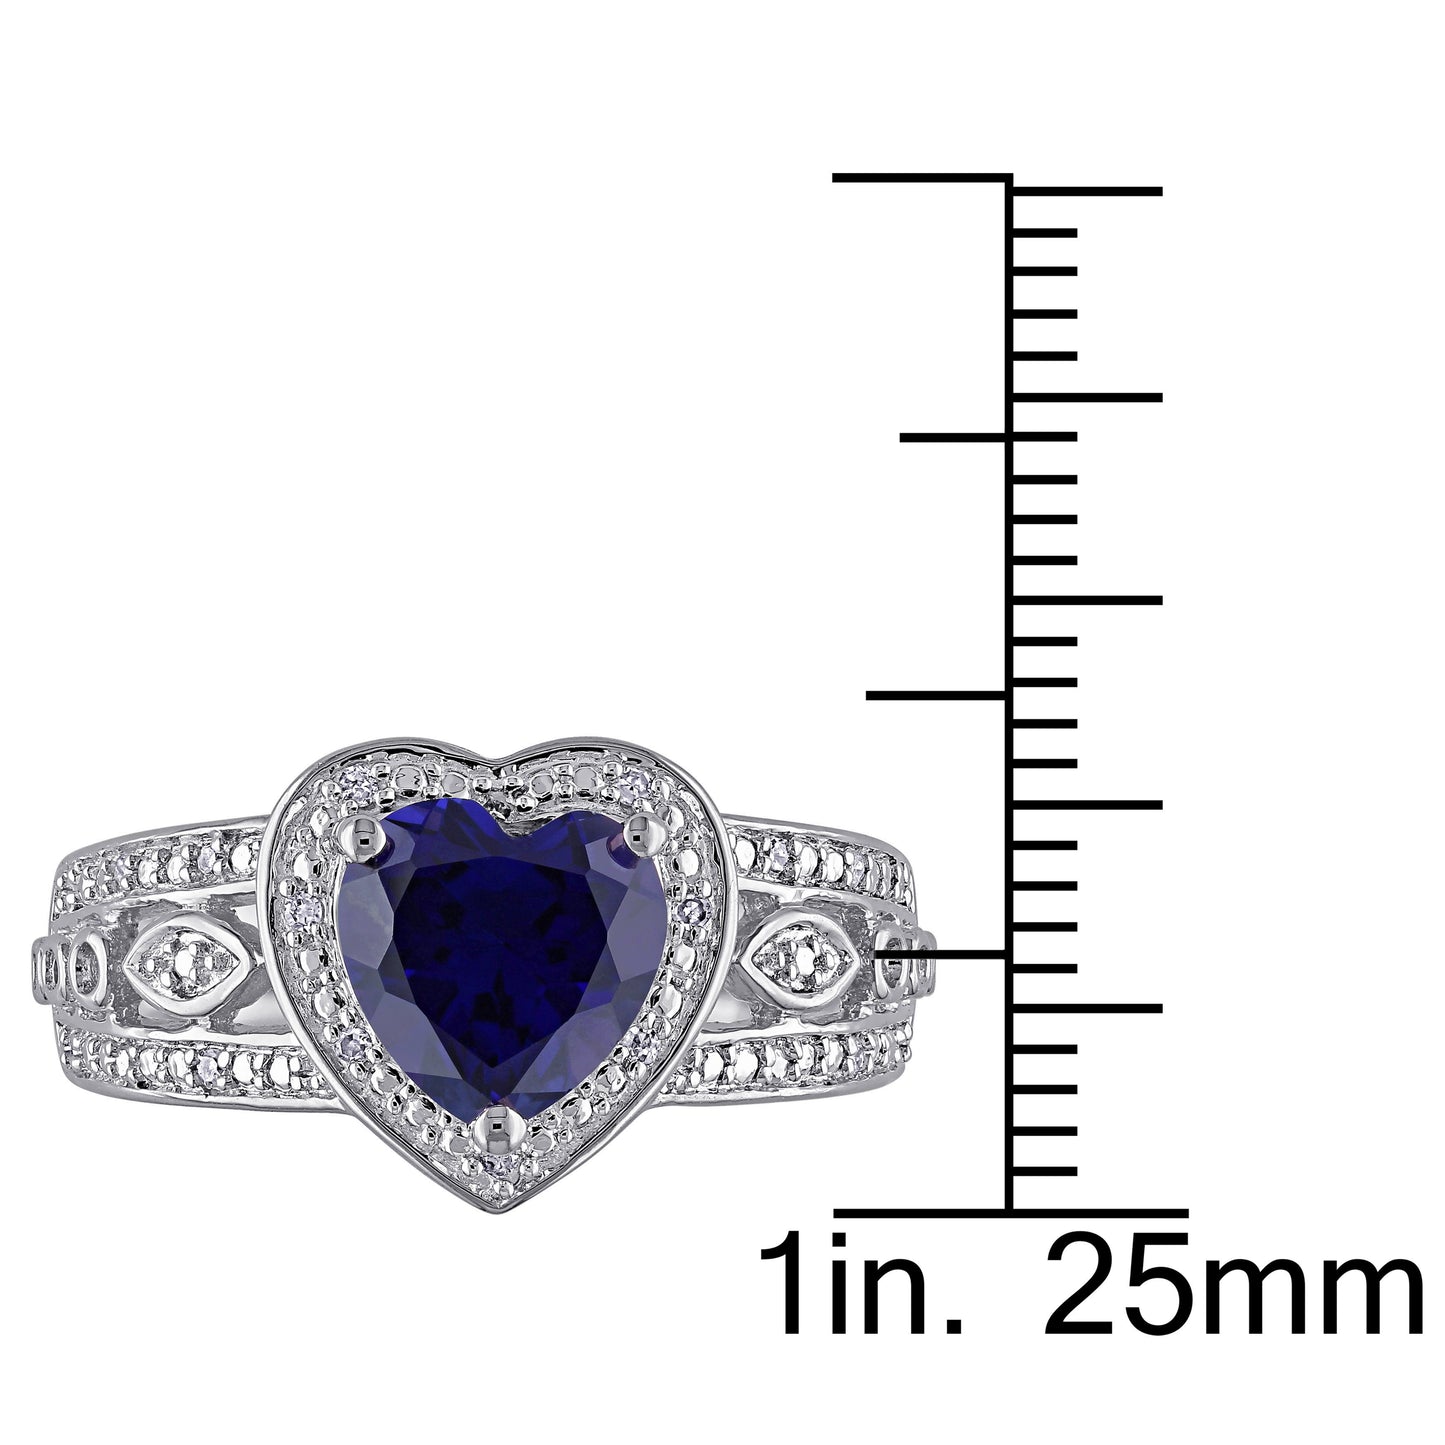 Heart Shaped Art Deco Sapphire & Diamond Ring in Sterling Silver